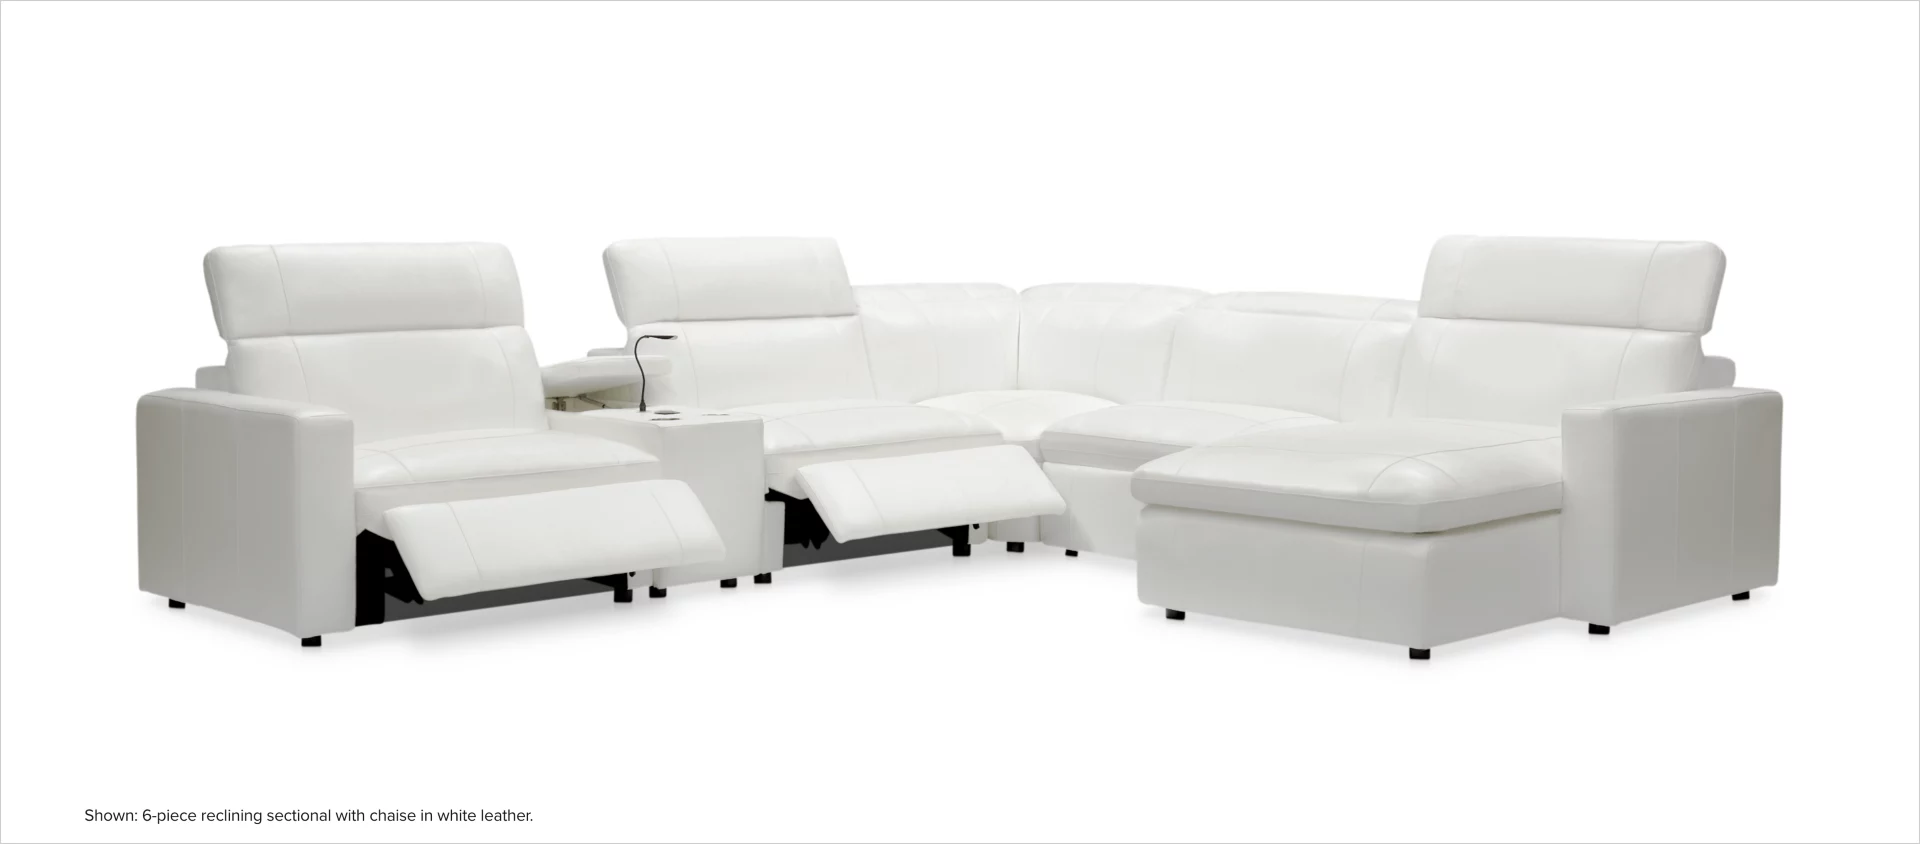 Happy 6-piece reclining sectional with chaise in white leather.